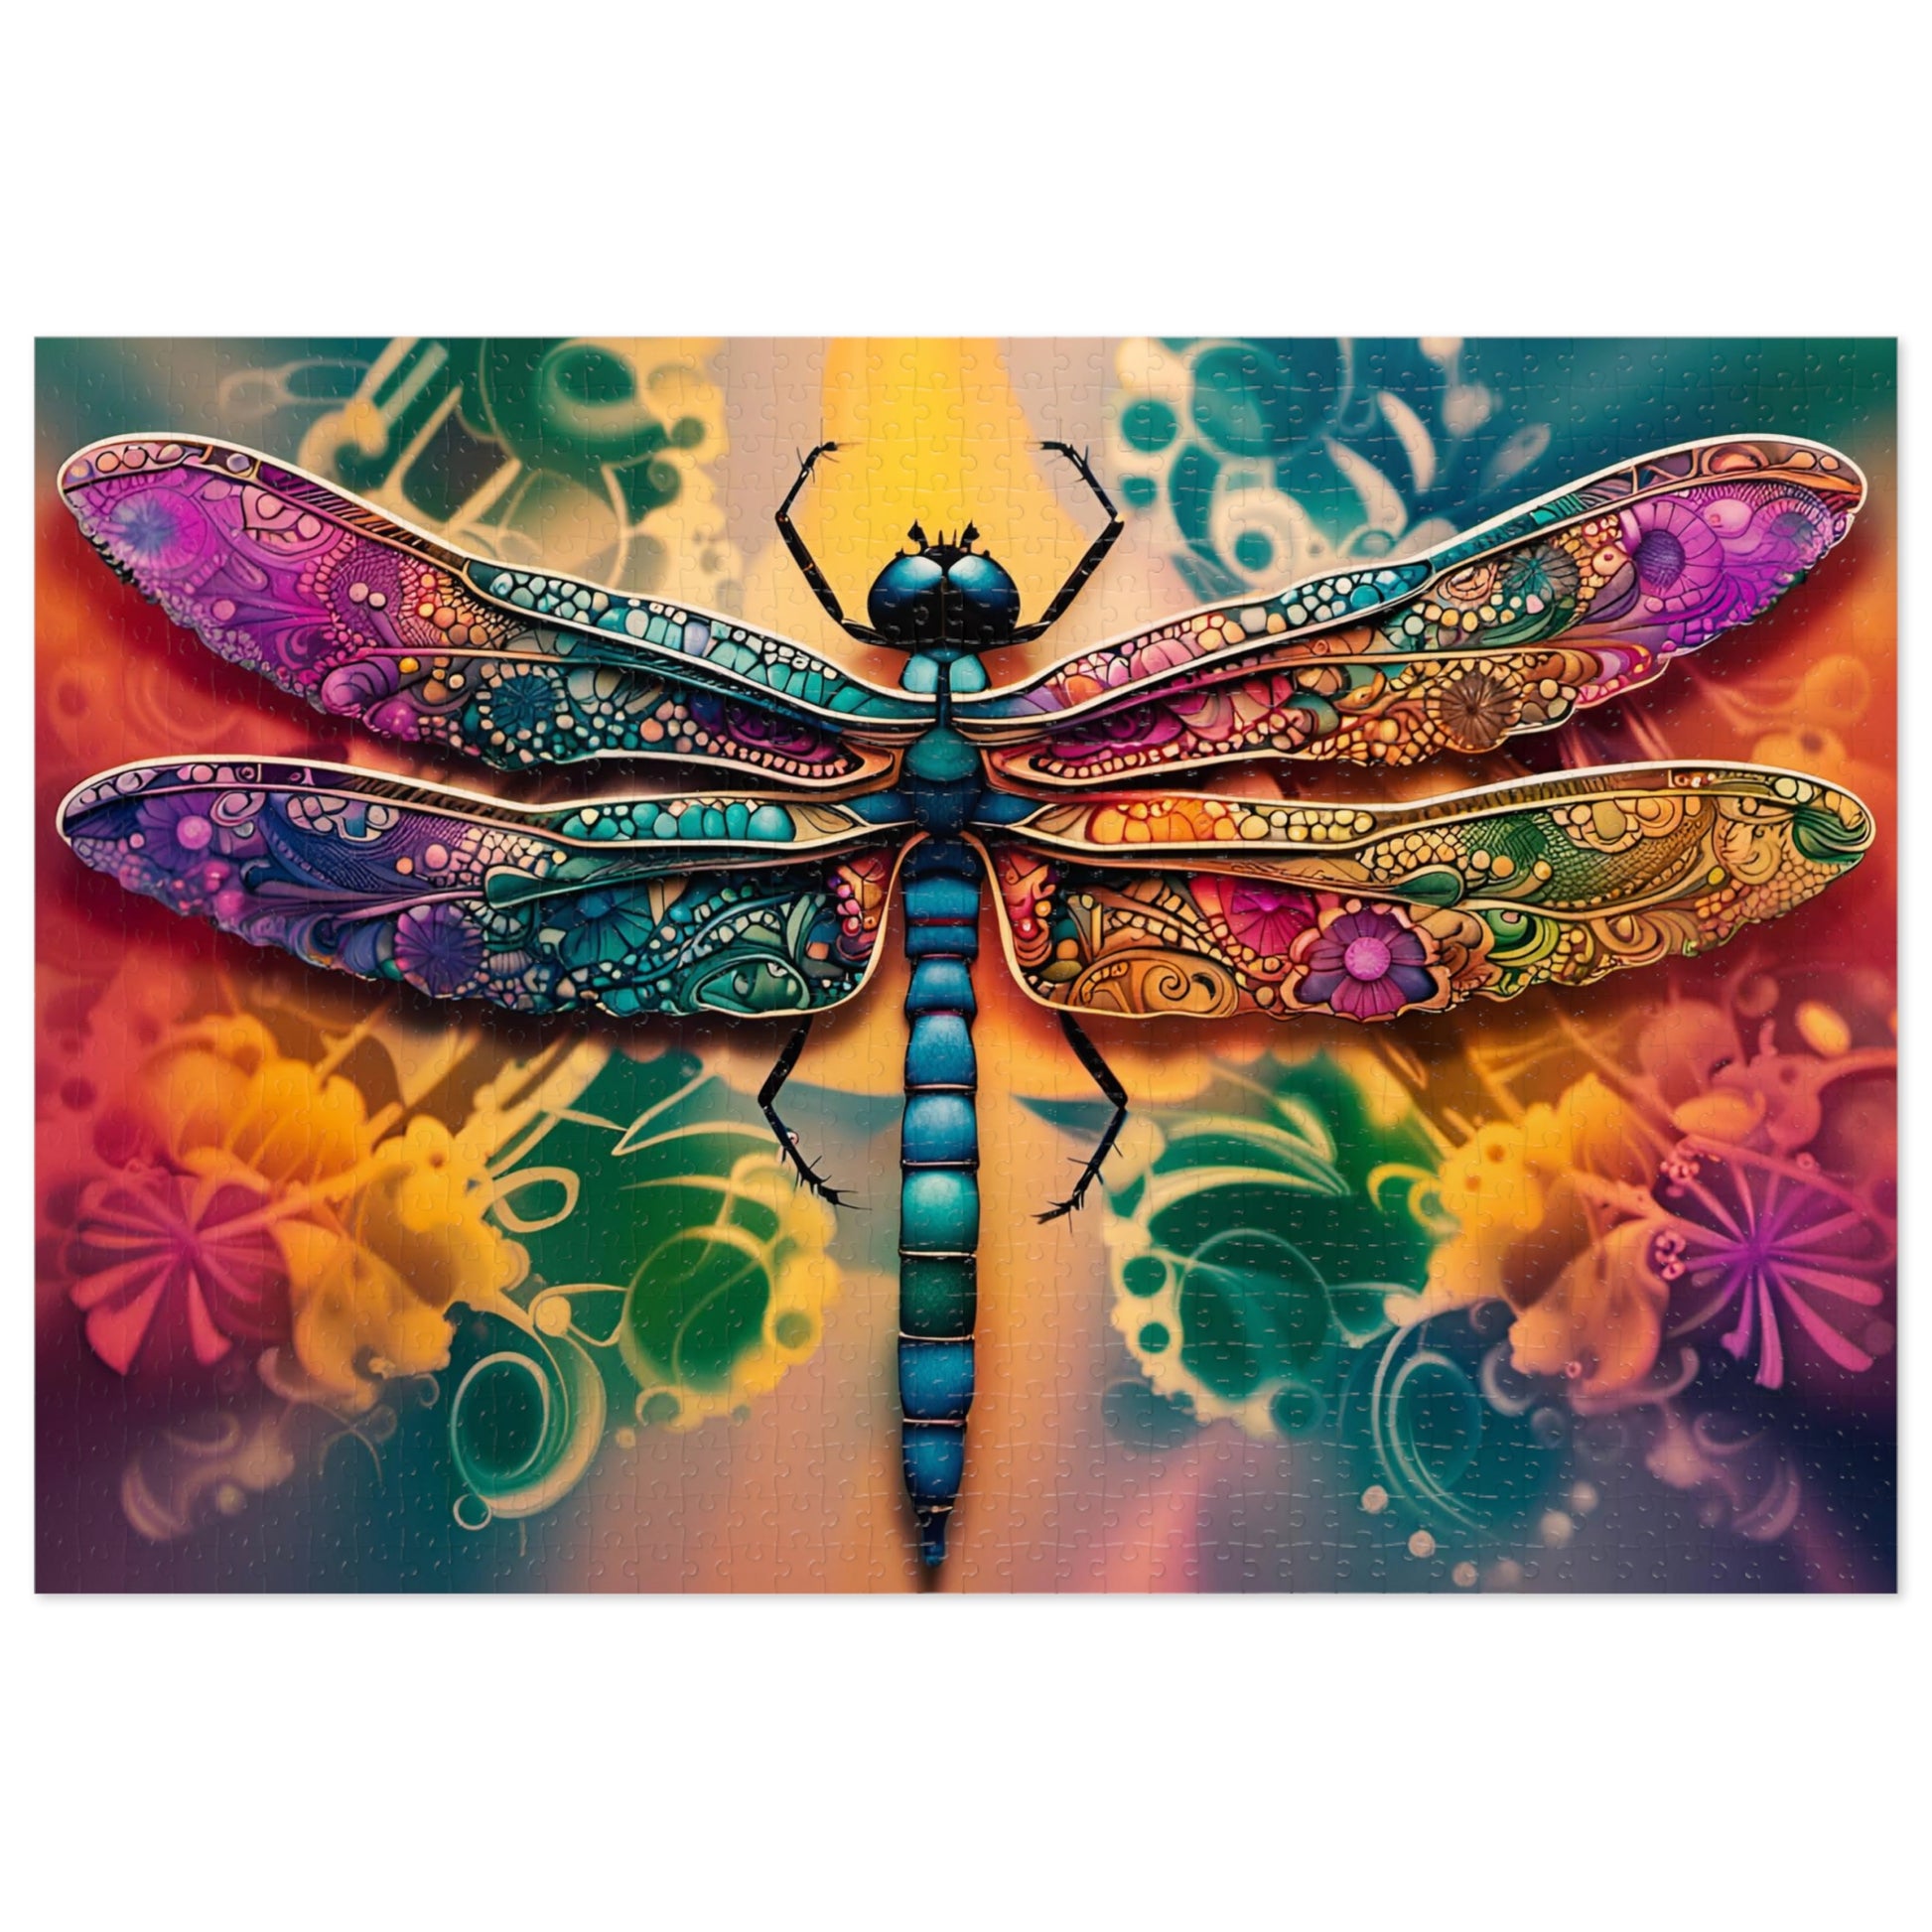 Dragonfly Themed Jigsaw Puzzle - Multicolor Psychedelic Dragonfly 1000 Pieces Puzzle